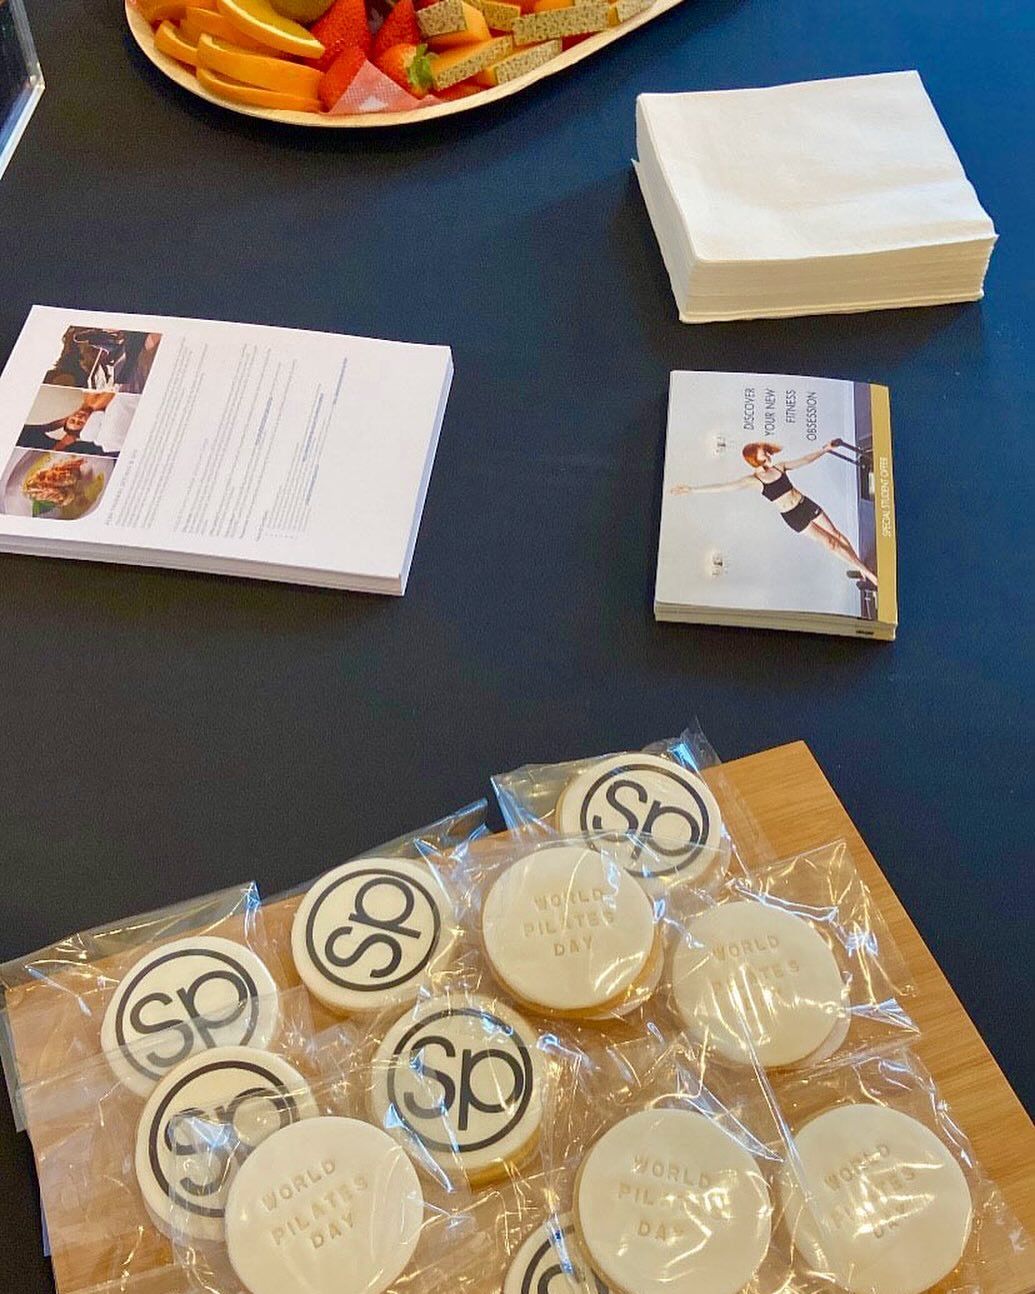 WORLD PILATES DAY! 🎉 @studiopilatesarmadale celebrating in style with our personalised cookies + branded logo cookies for their lucky clients! 😋